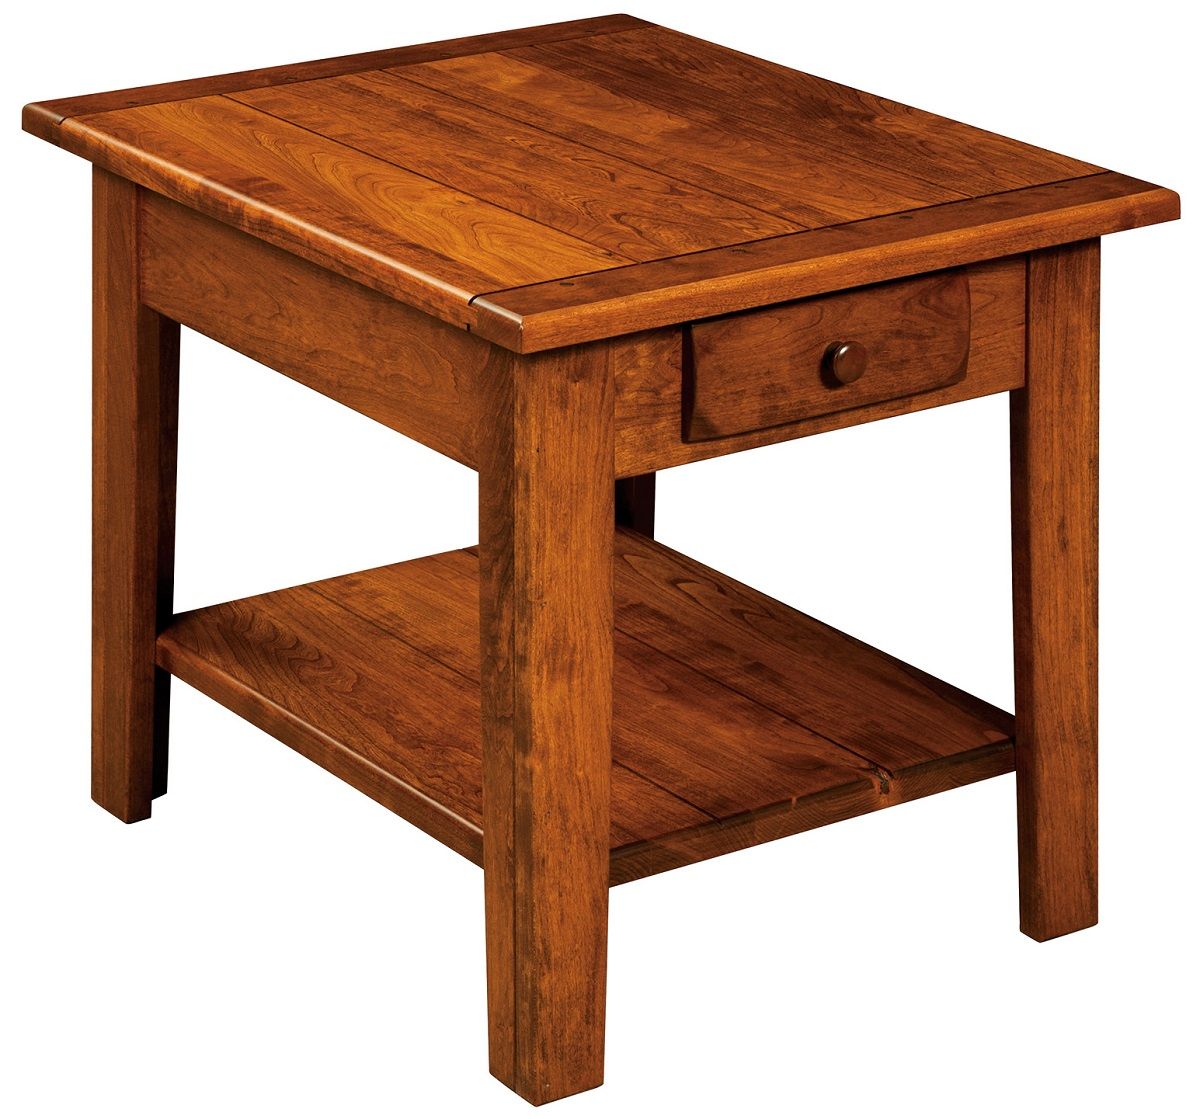 Rustic Alcott End Table